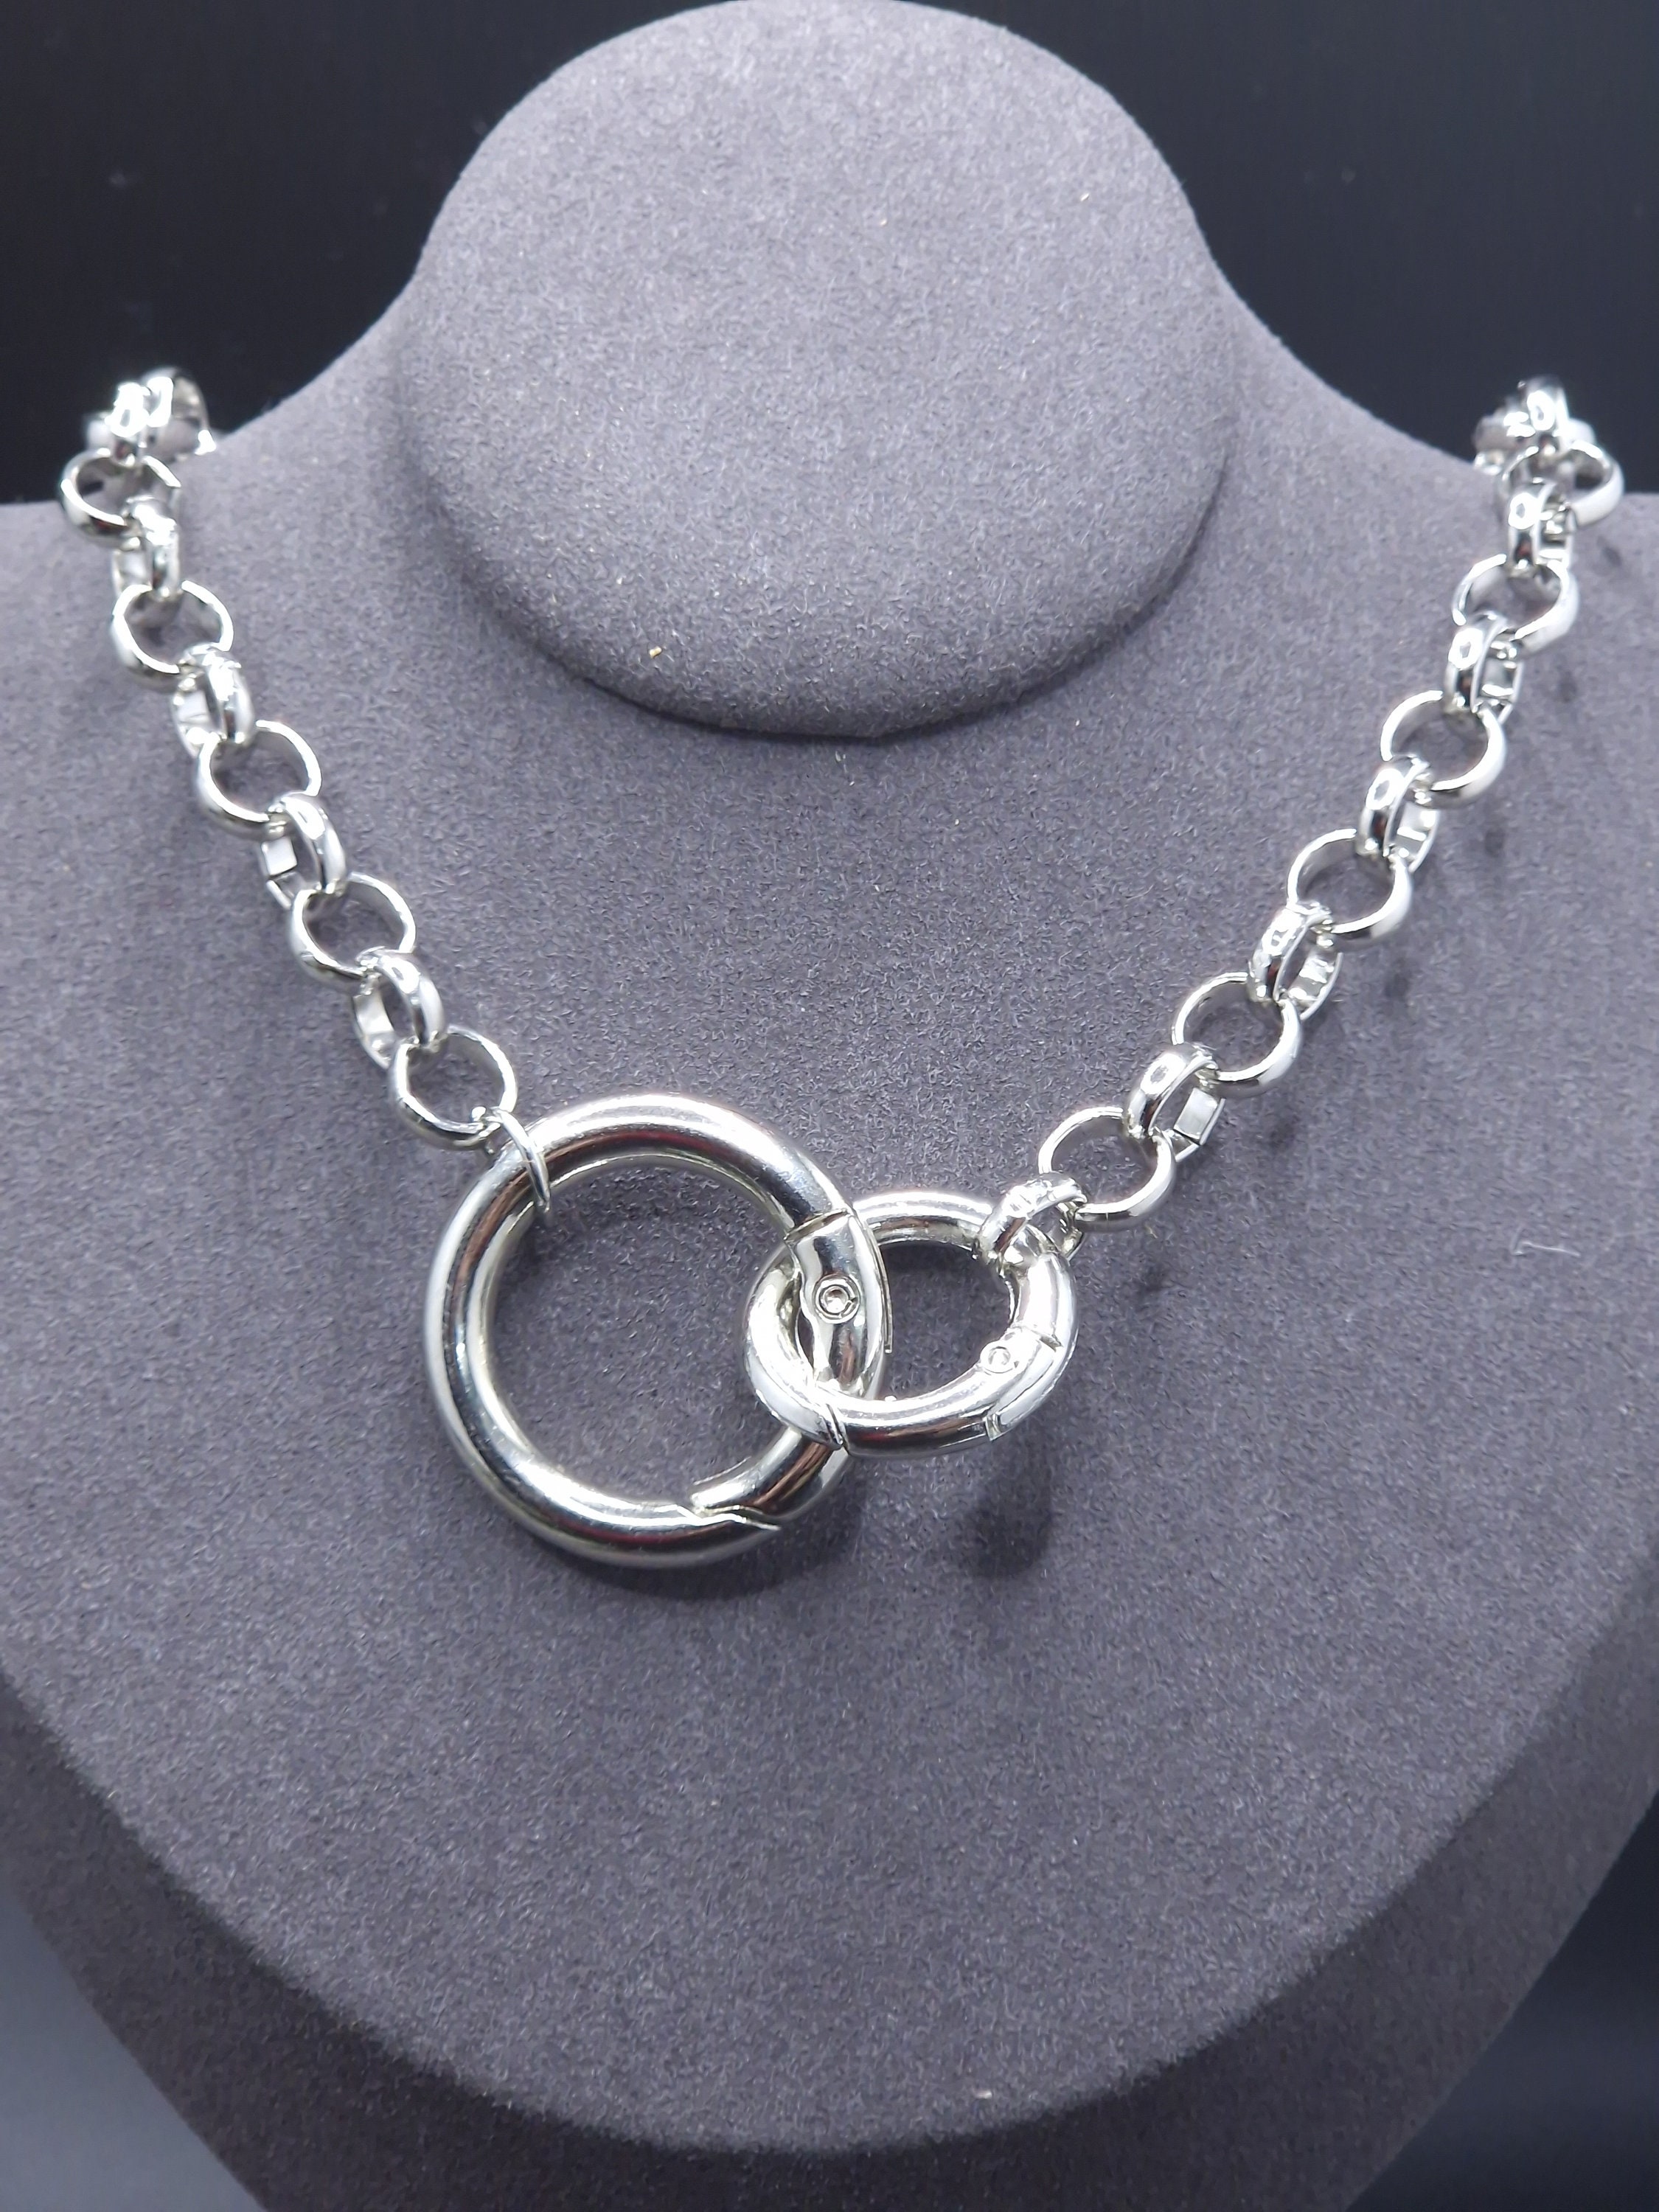 Adjustable Stainless Steel Necklace Chain with Artisan Clasp, Custom Length, Finished with Hook Closure, Non-Tarnishing